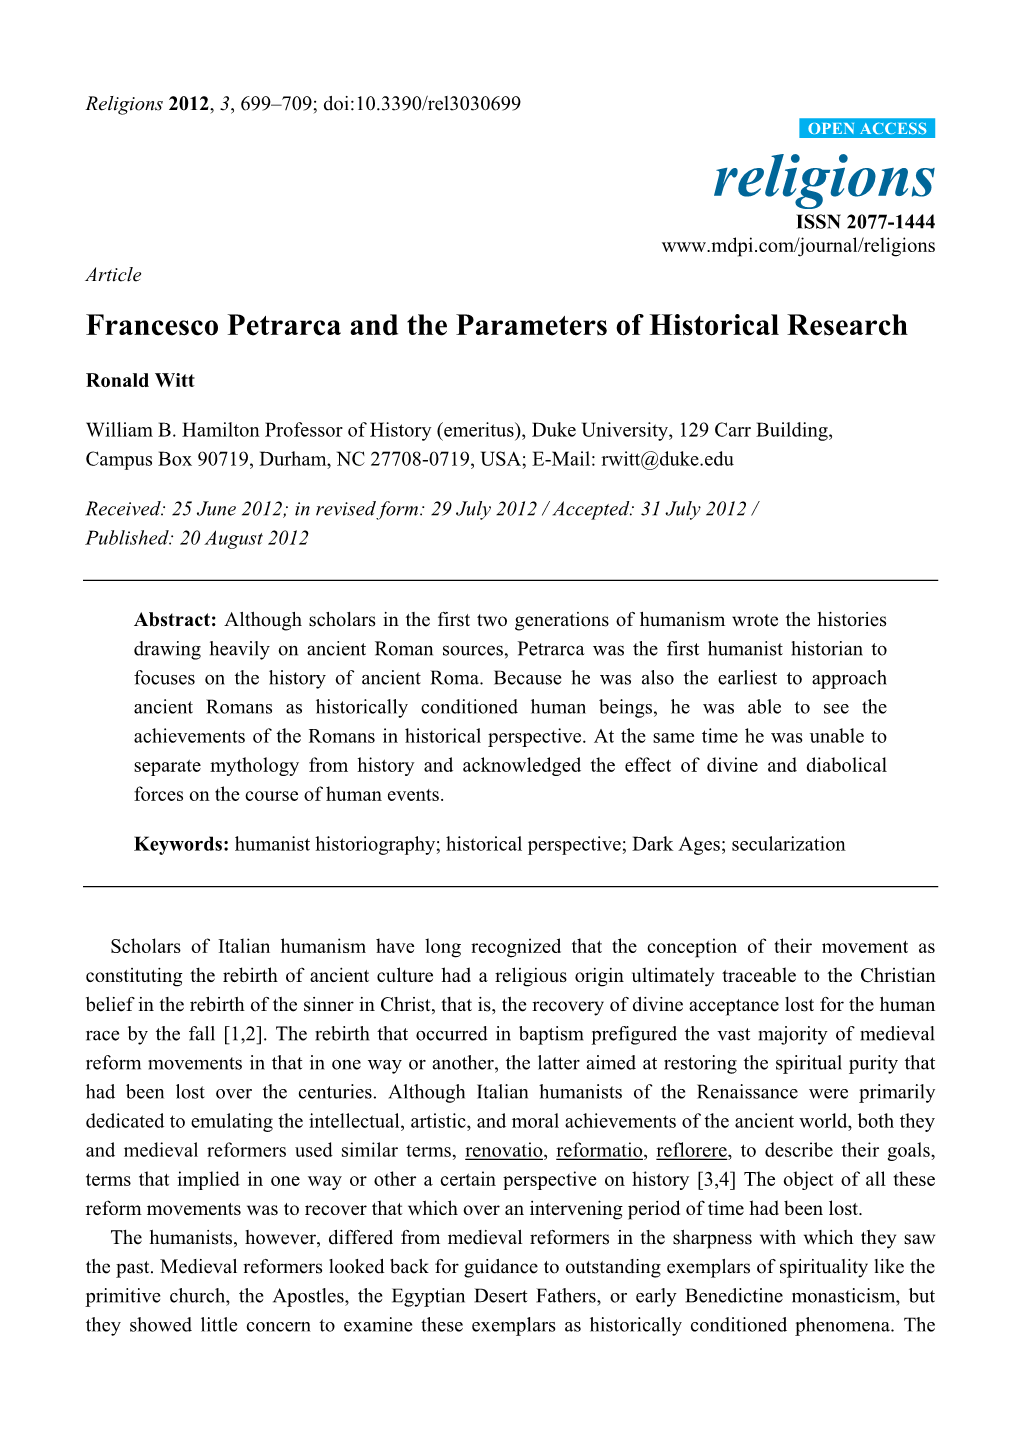 Francesco Petrarca and the Parameters of Historical Research